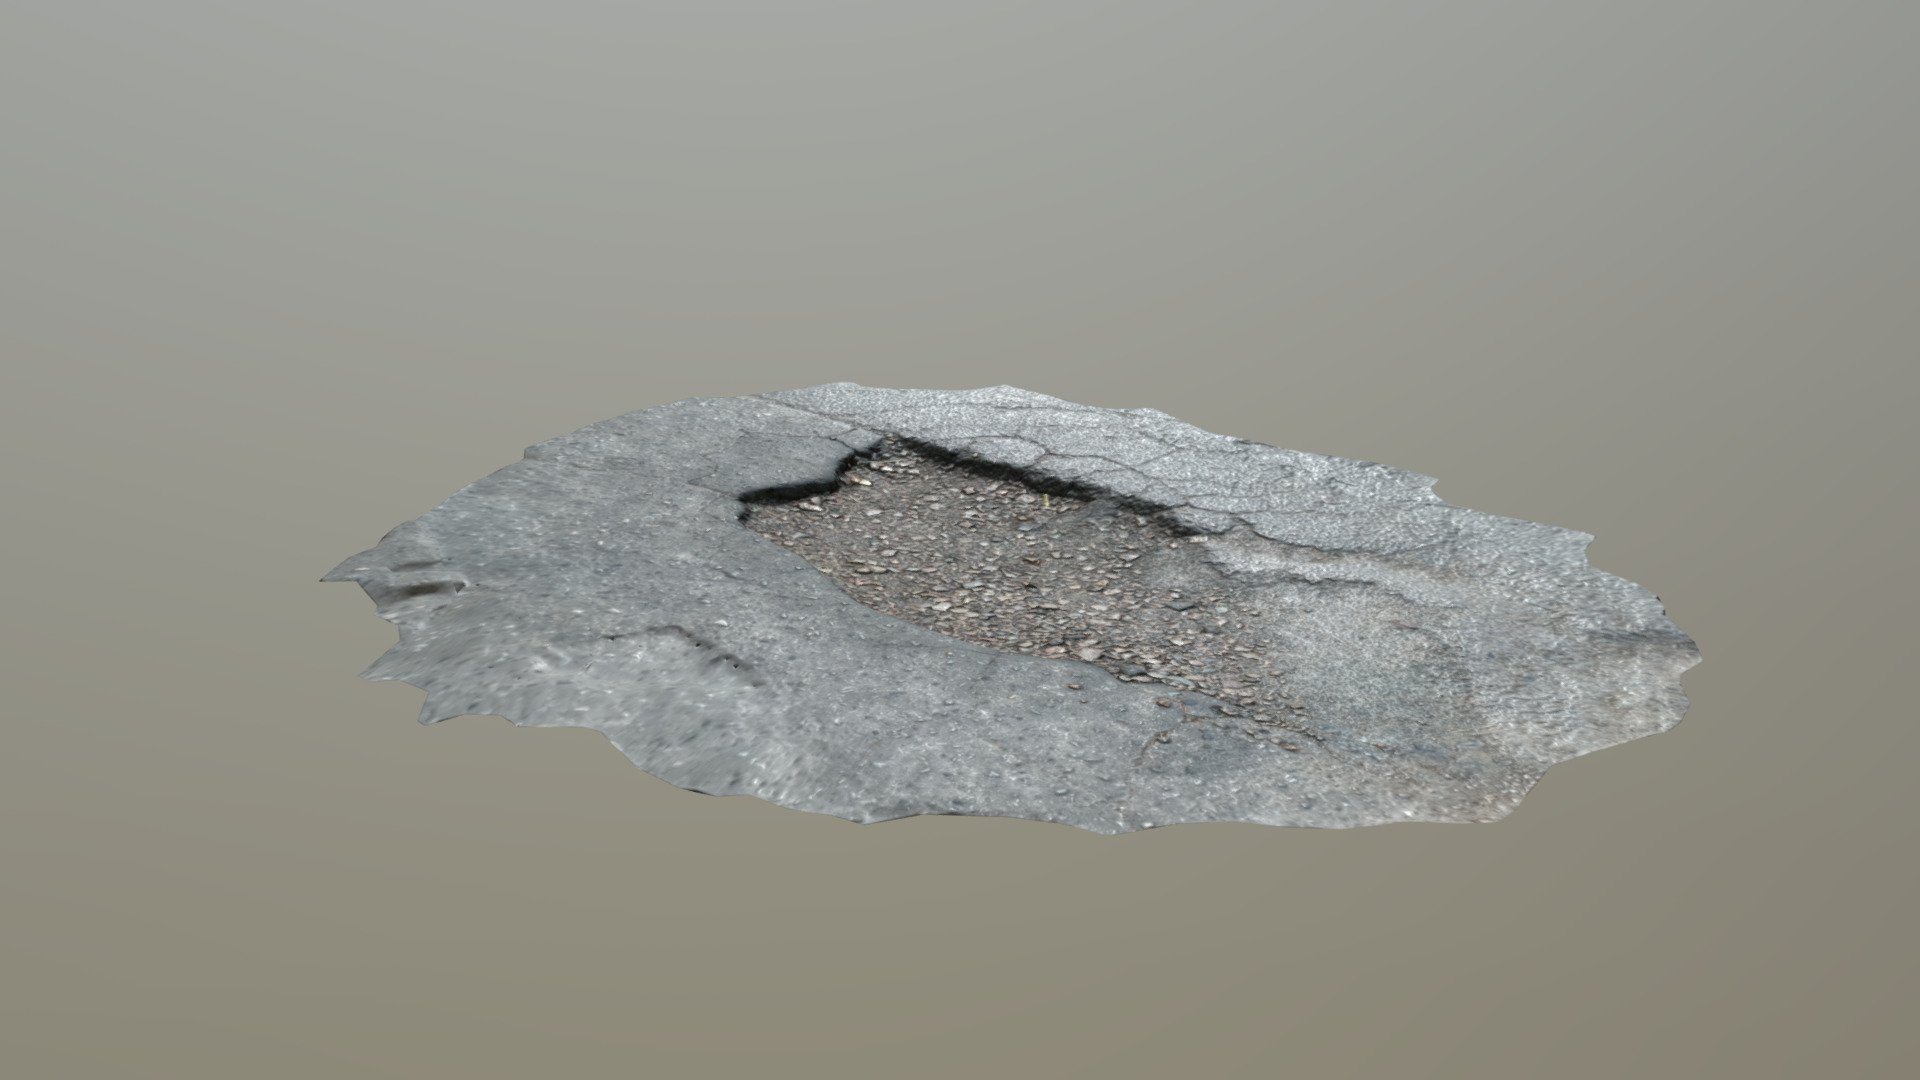 Another test with photogrammetry. This time I chose a hole in the road in my neighborhood 3d model